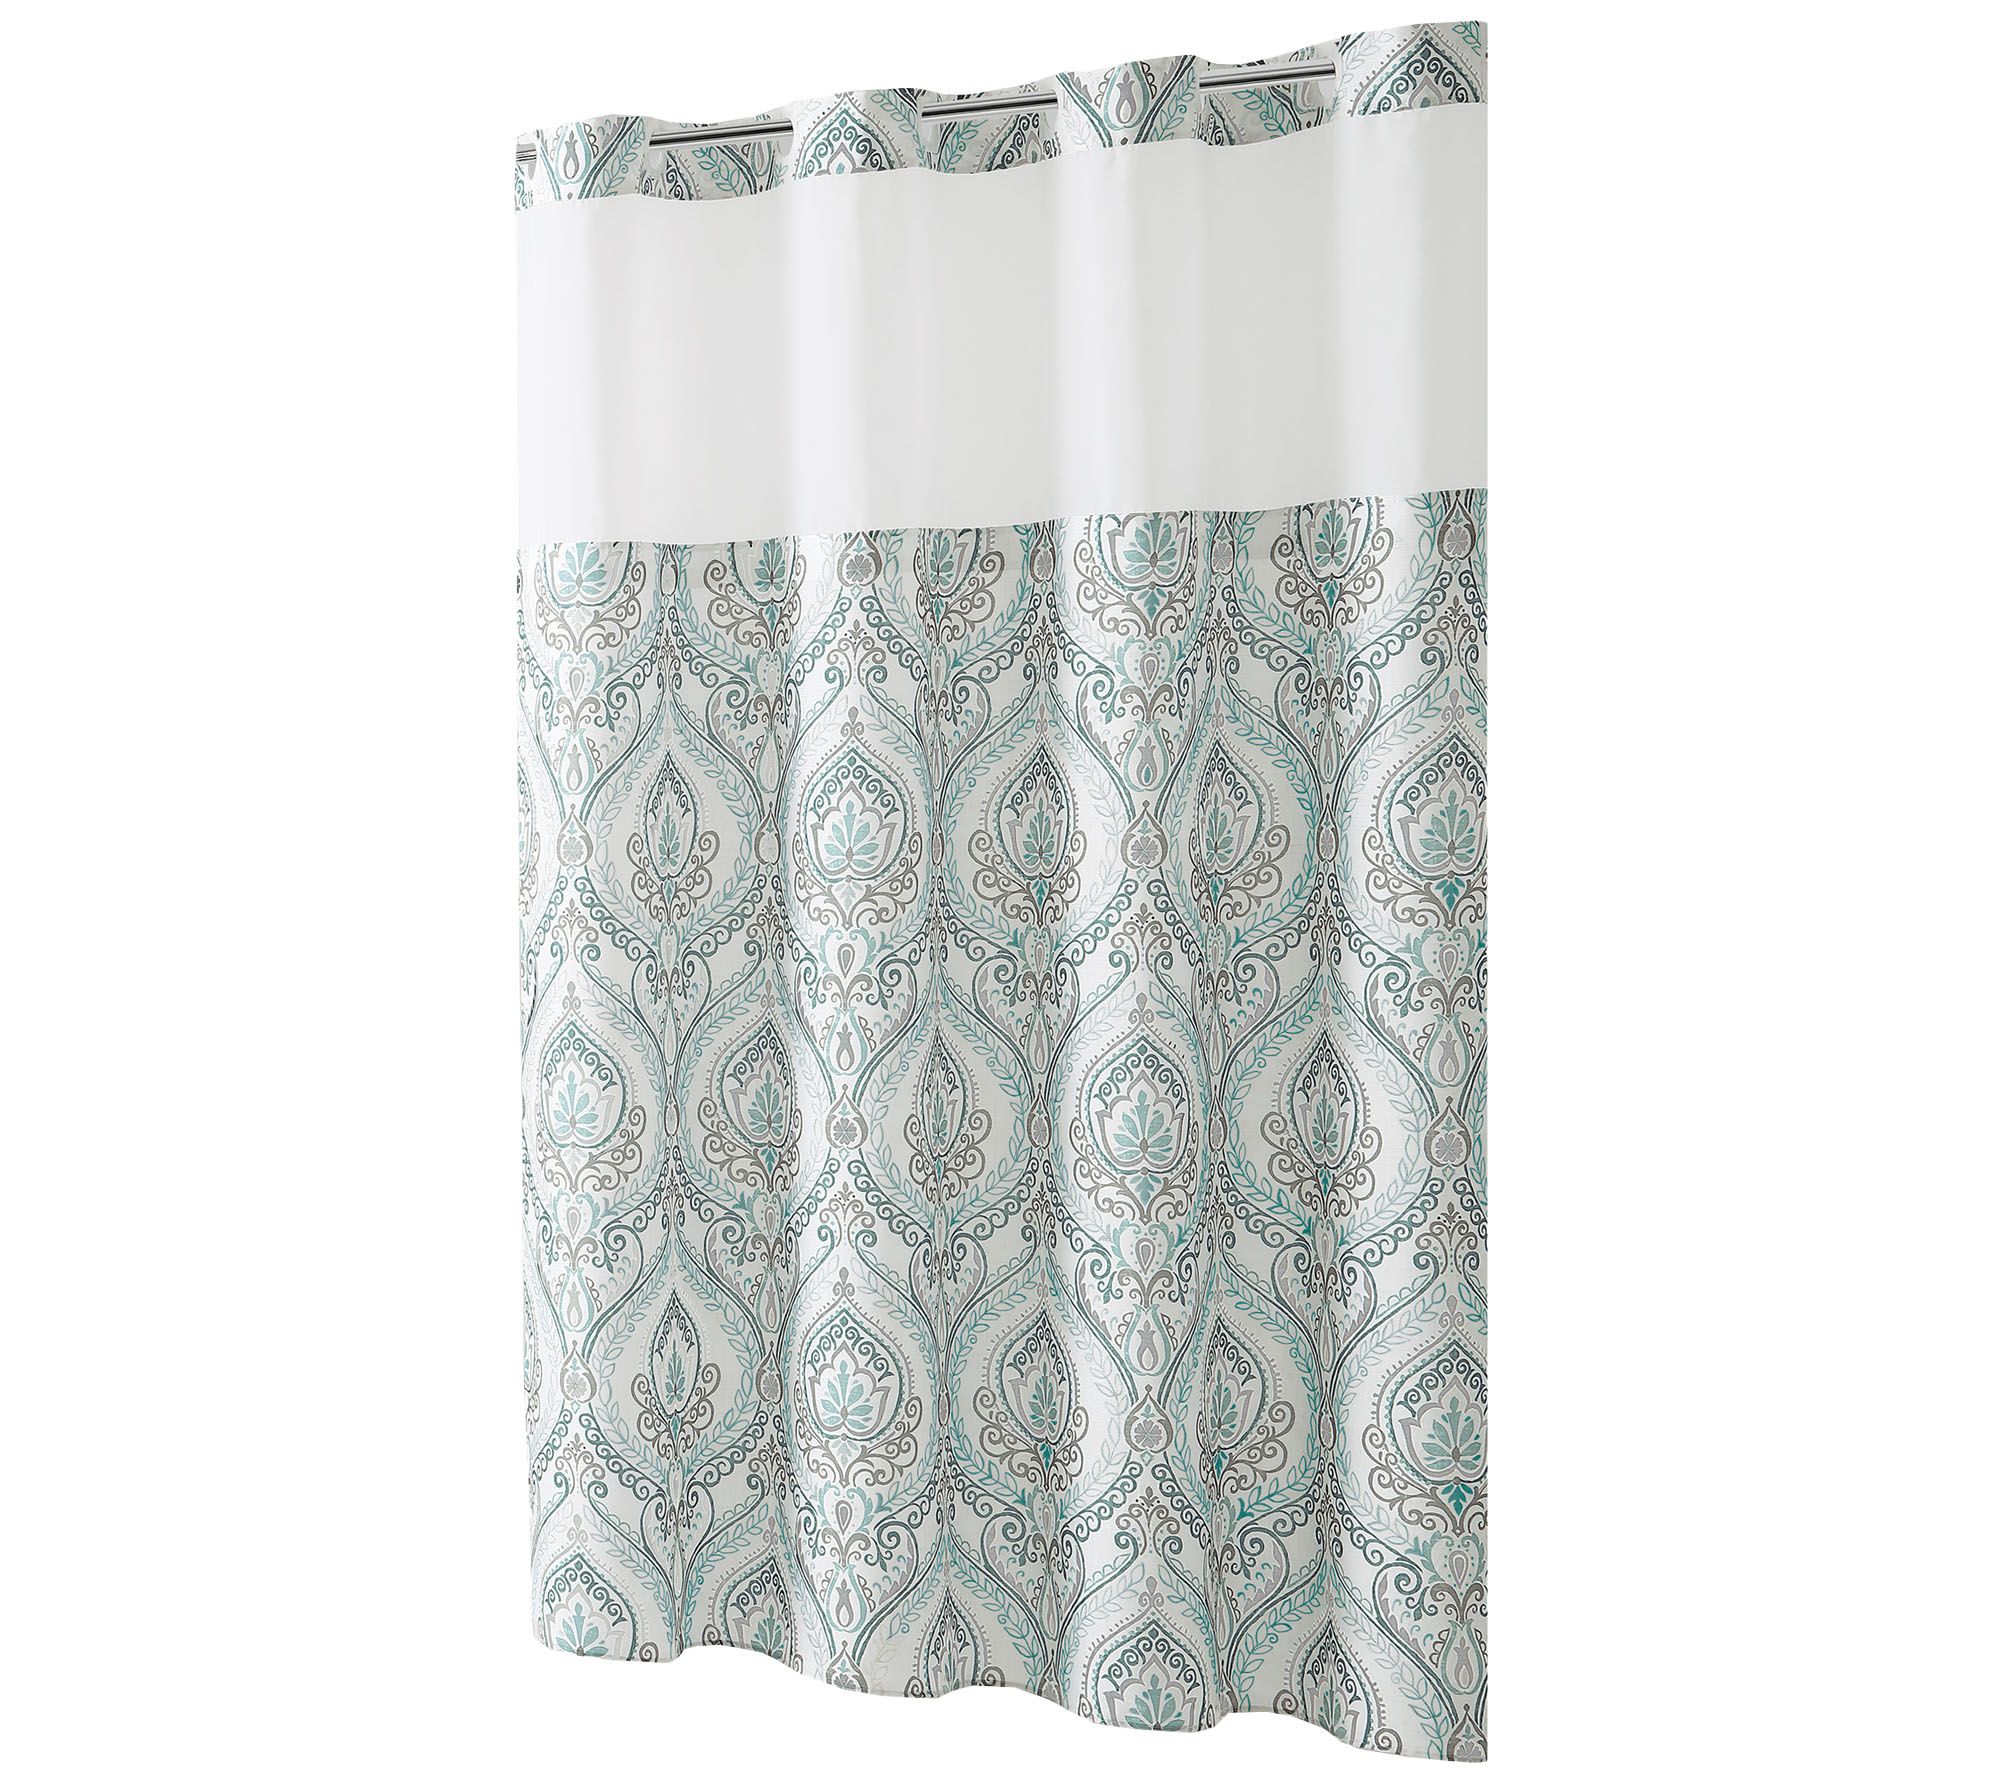 Hookless French Damask Shower Curtain with Built-In Liner 